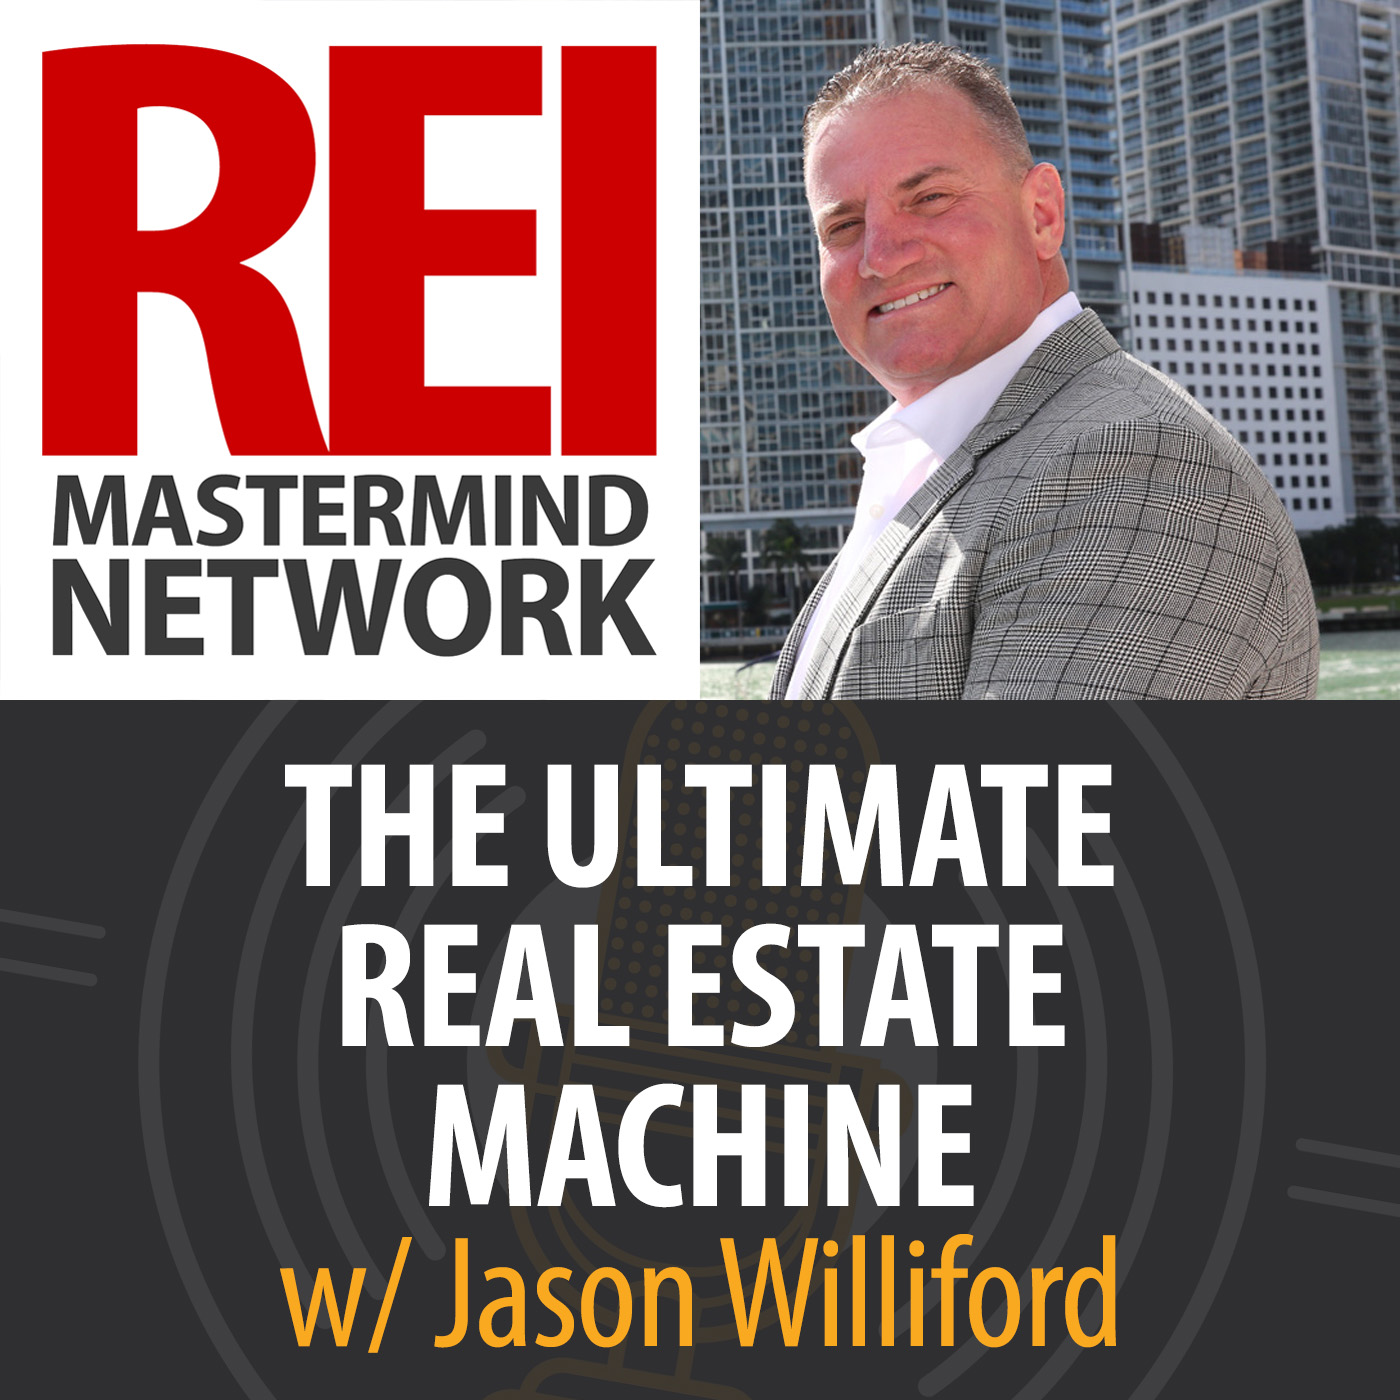 The Ultimate Real Estate Machine with Jason Williford Image